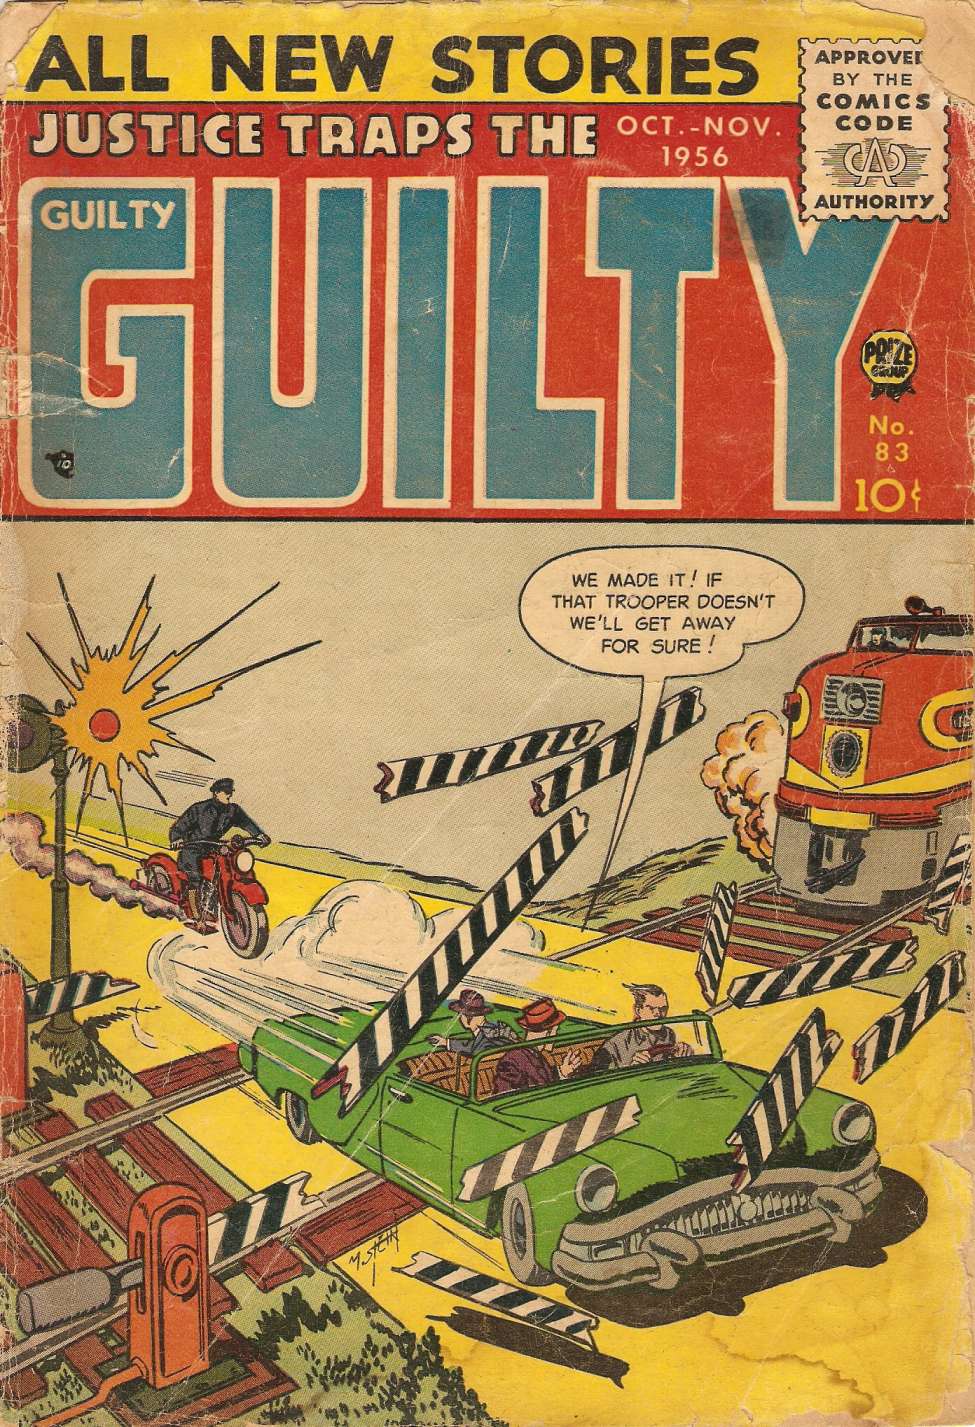 Book Cover For Justice Traps the Guilty 83 (alt)